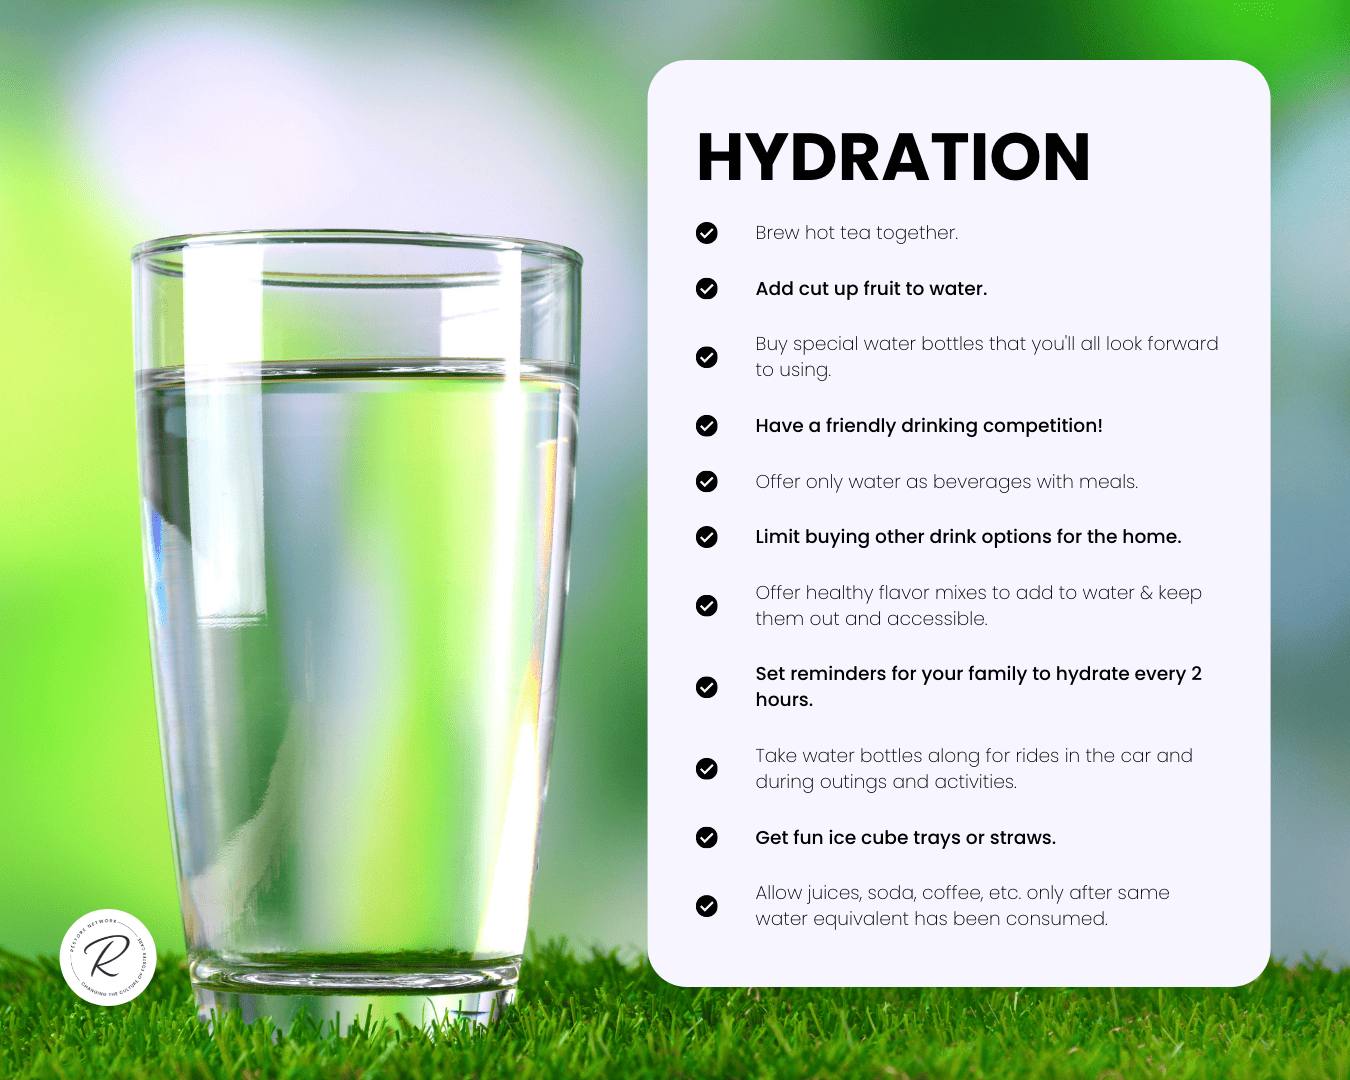 Hydration Tips